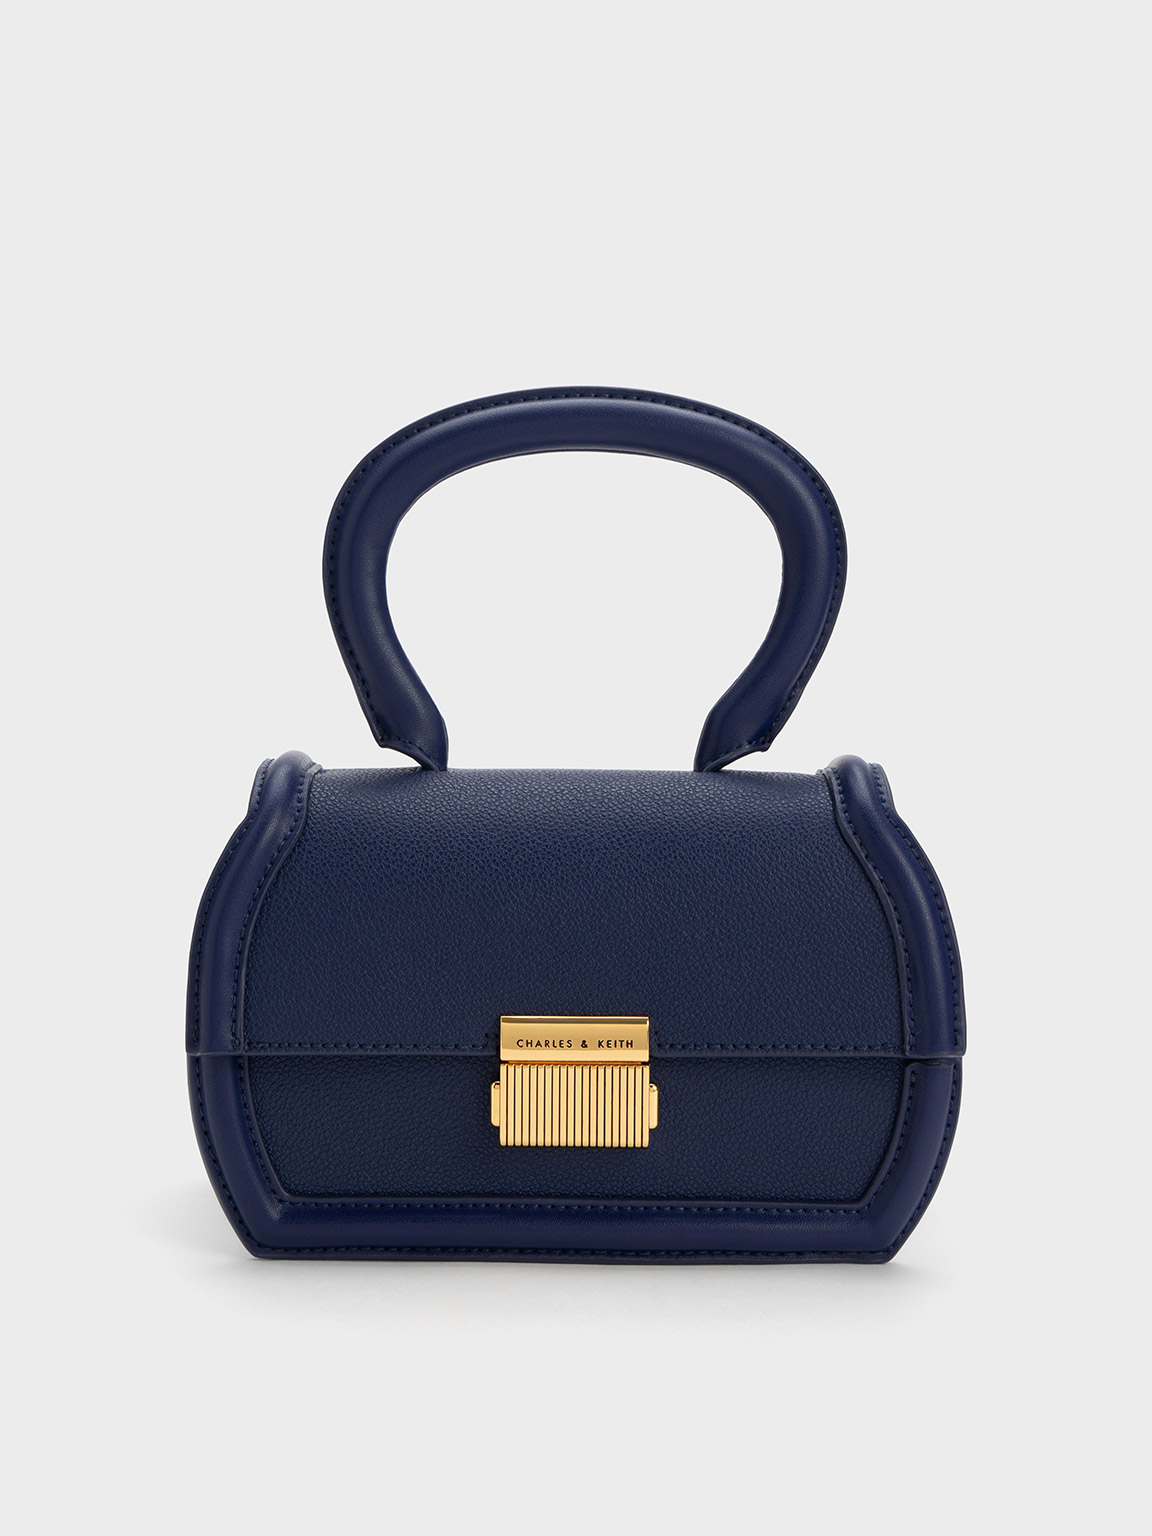 Charles & Keith Leona Sculptural Top Handle Bag In Blue